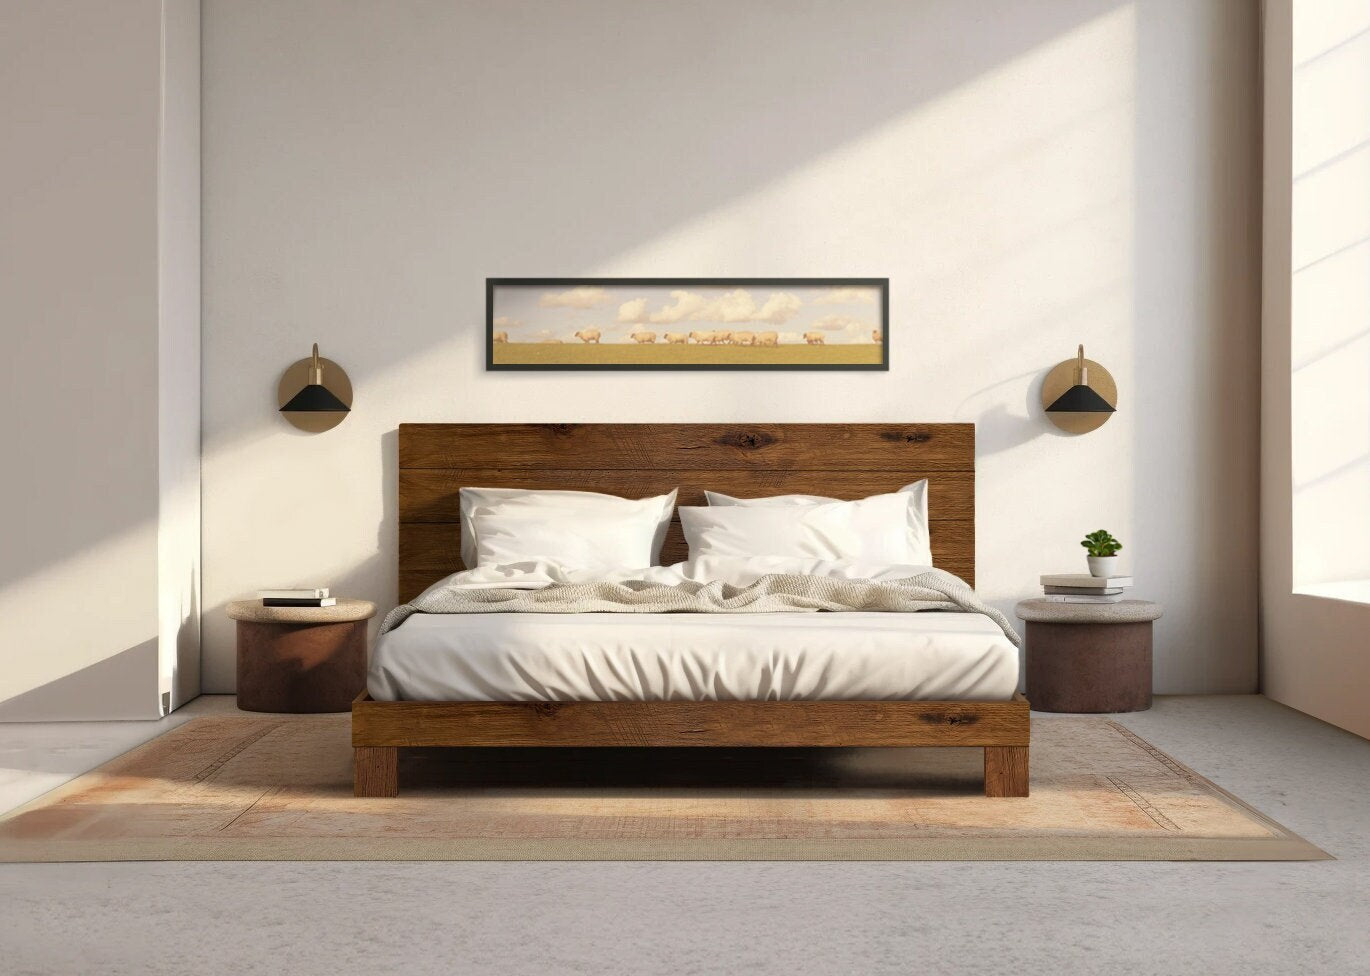 Rampart Bed - Quick Ship - Reclaimed Java Finish - Modern Rustic - Solid Wood - Platform Bed Frame & Headboard - Handmade in USA